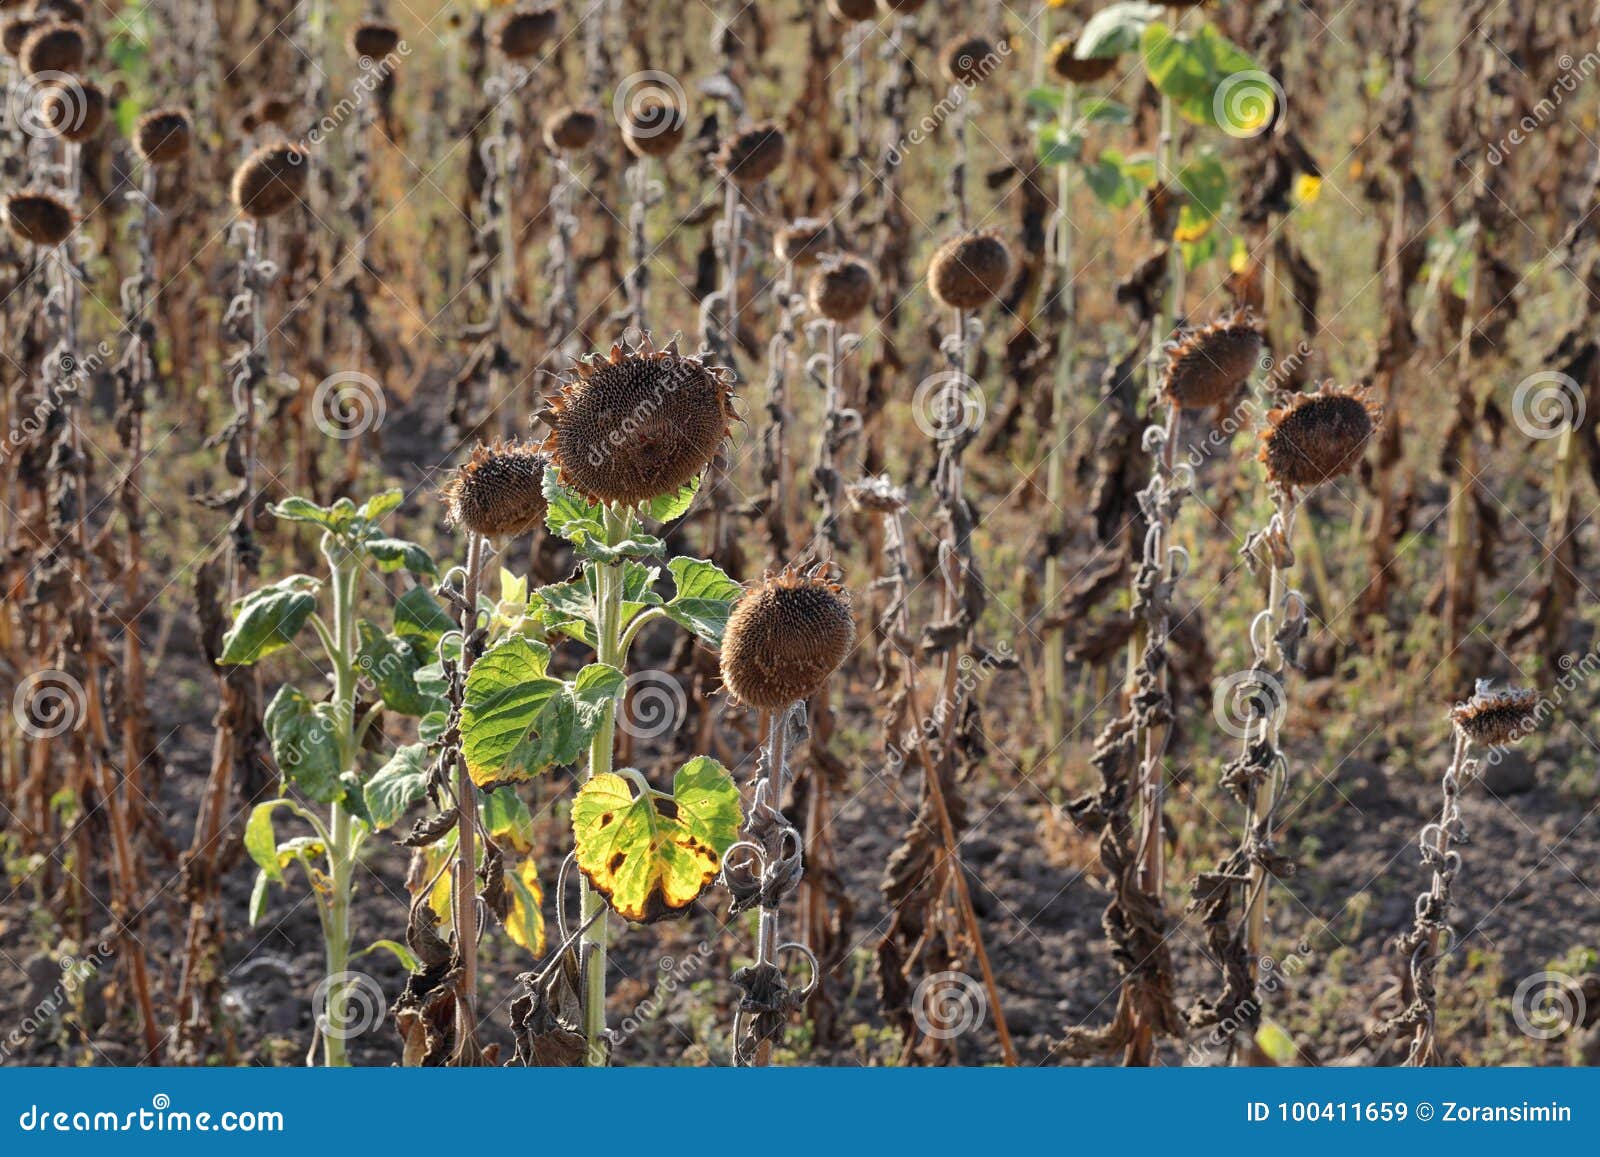 Climate Change, Drought in Sunflower Field Stock Image - Image of ...